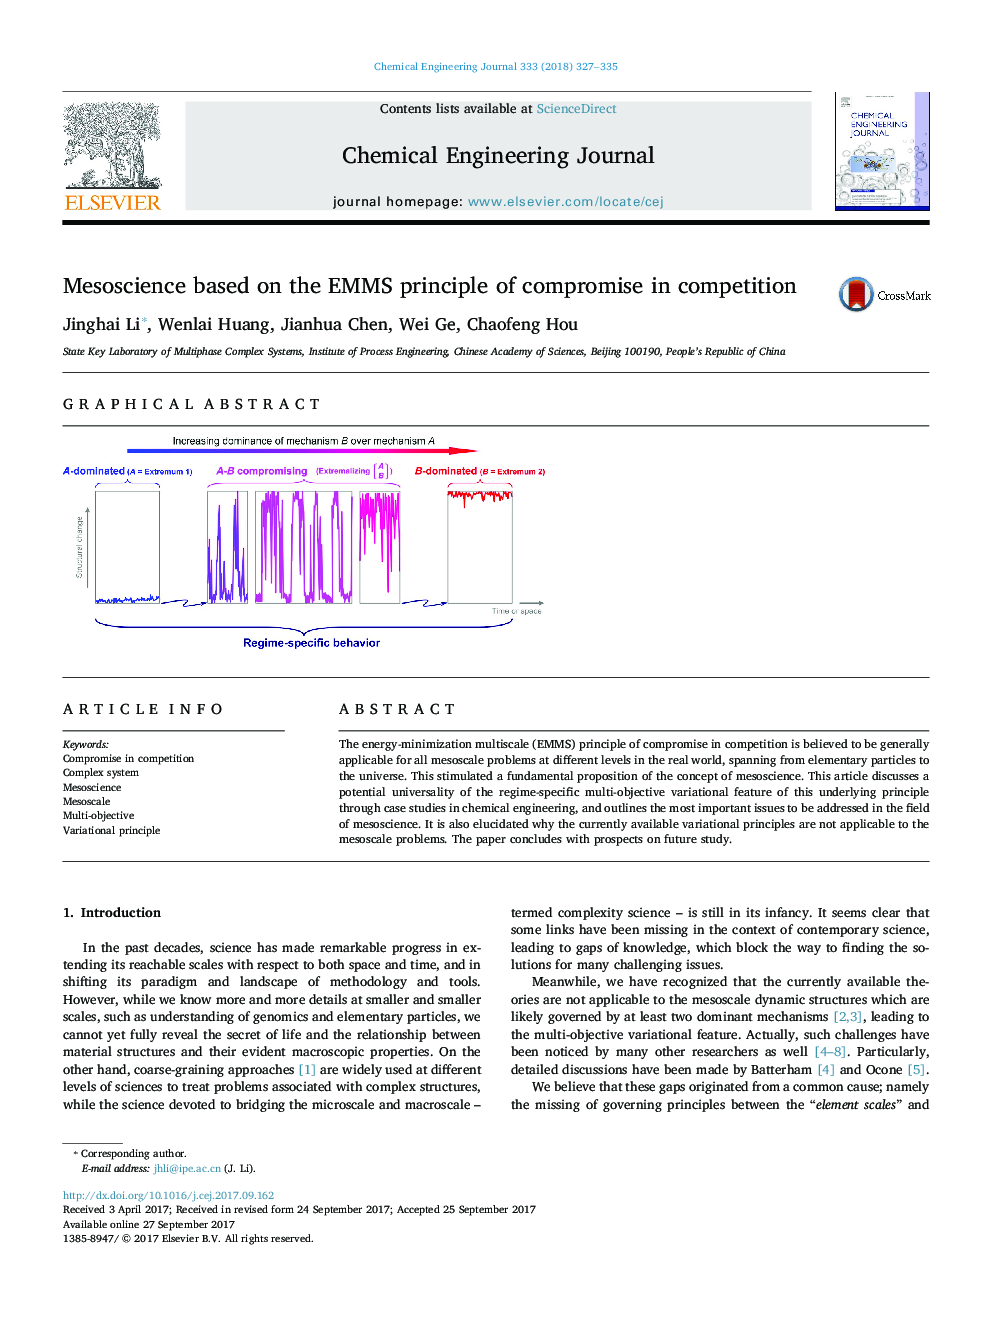 Mesoscience based on the EMMS principle of compromise in competition